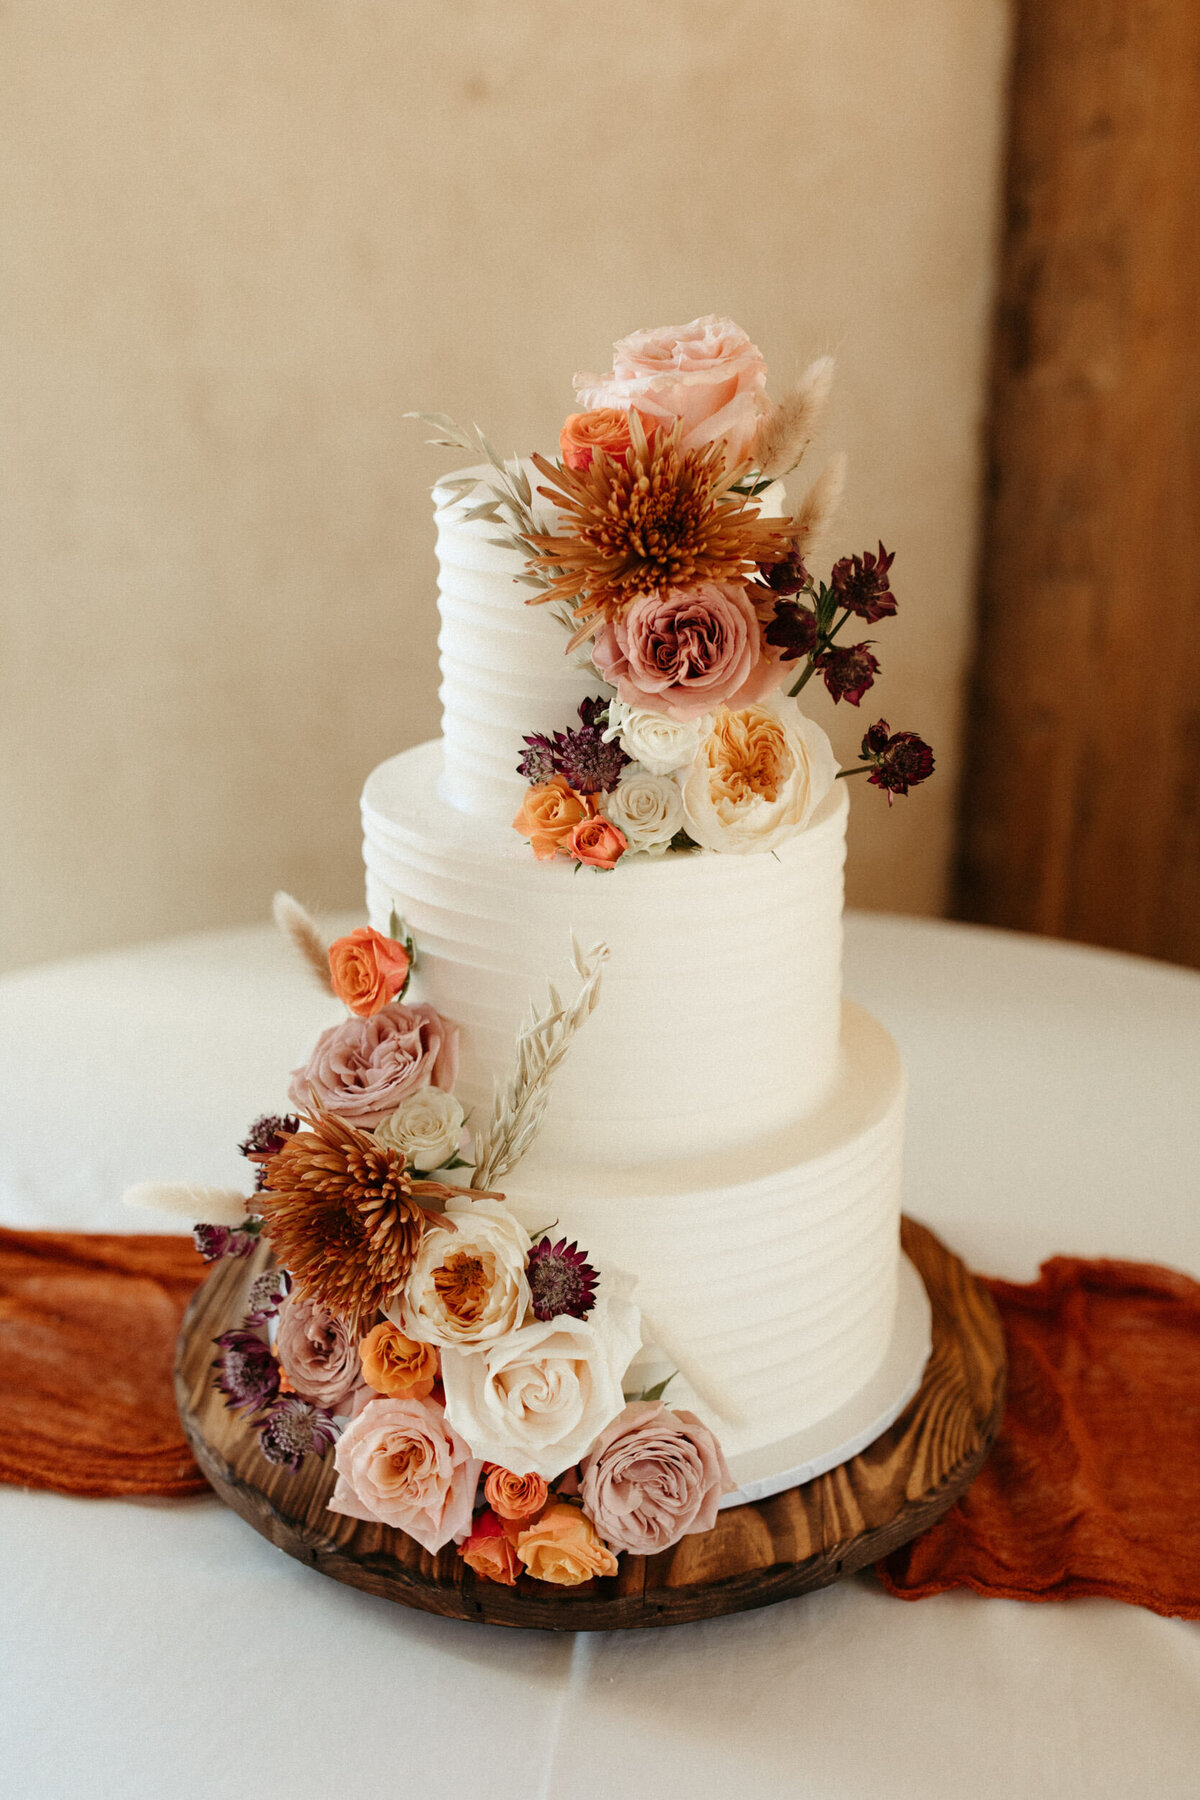 Simple three tier wedding cake with golden and rust colored flowers for decorations